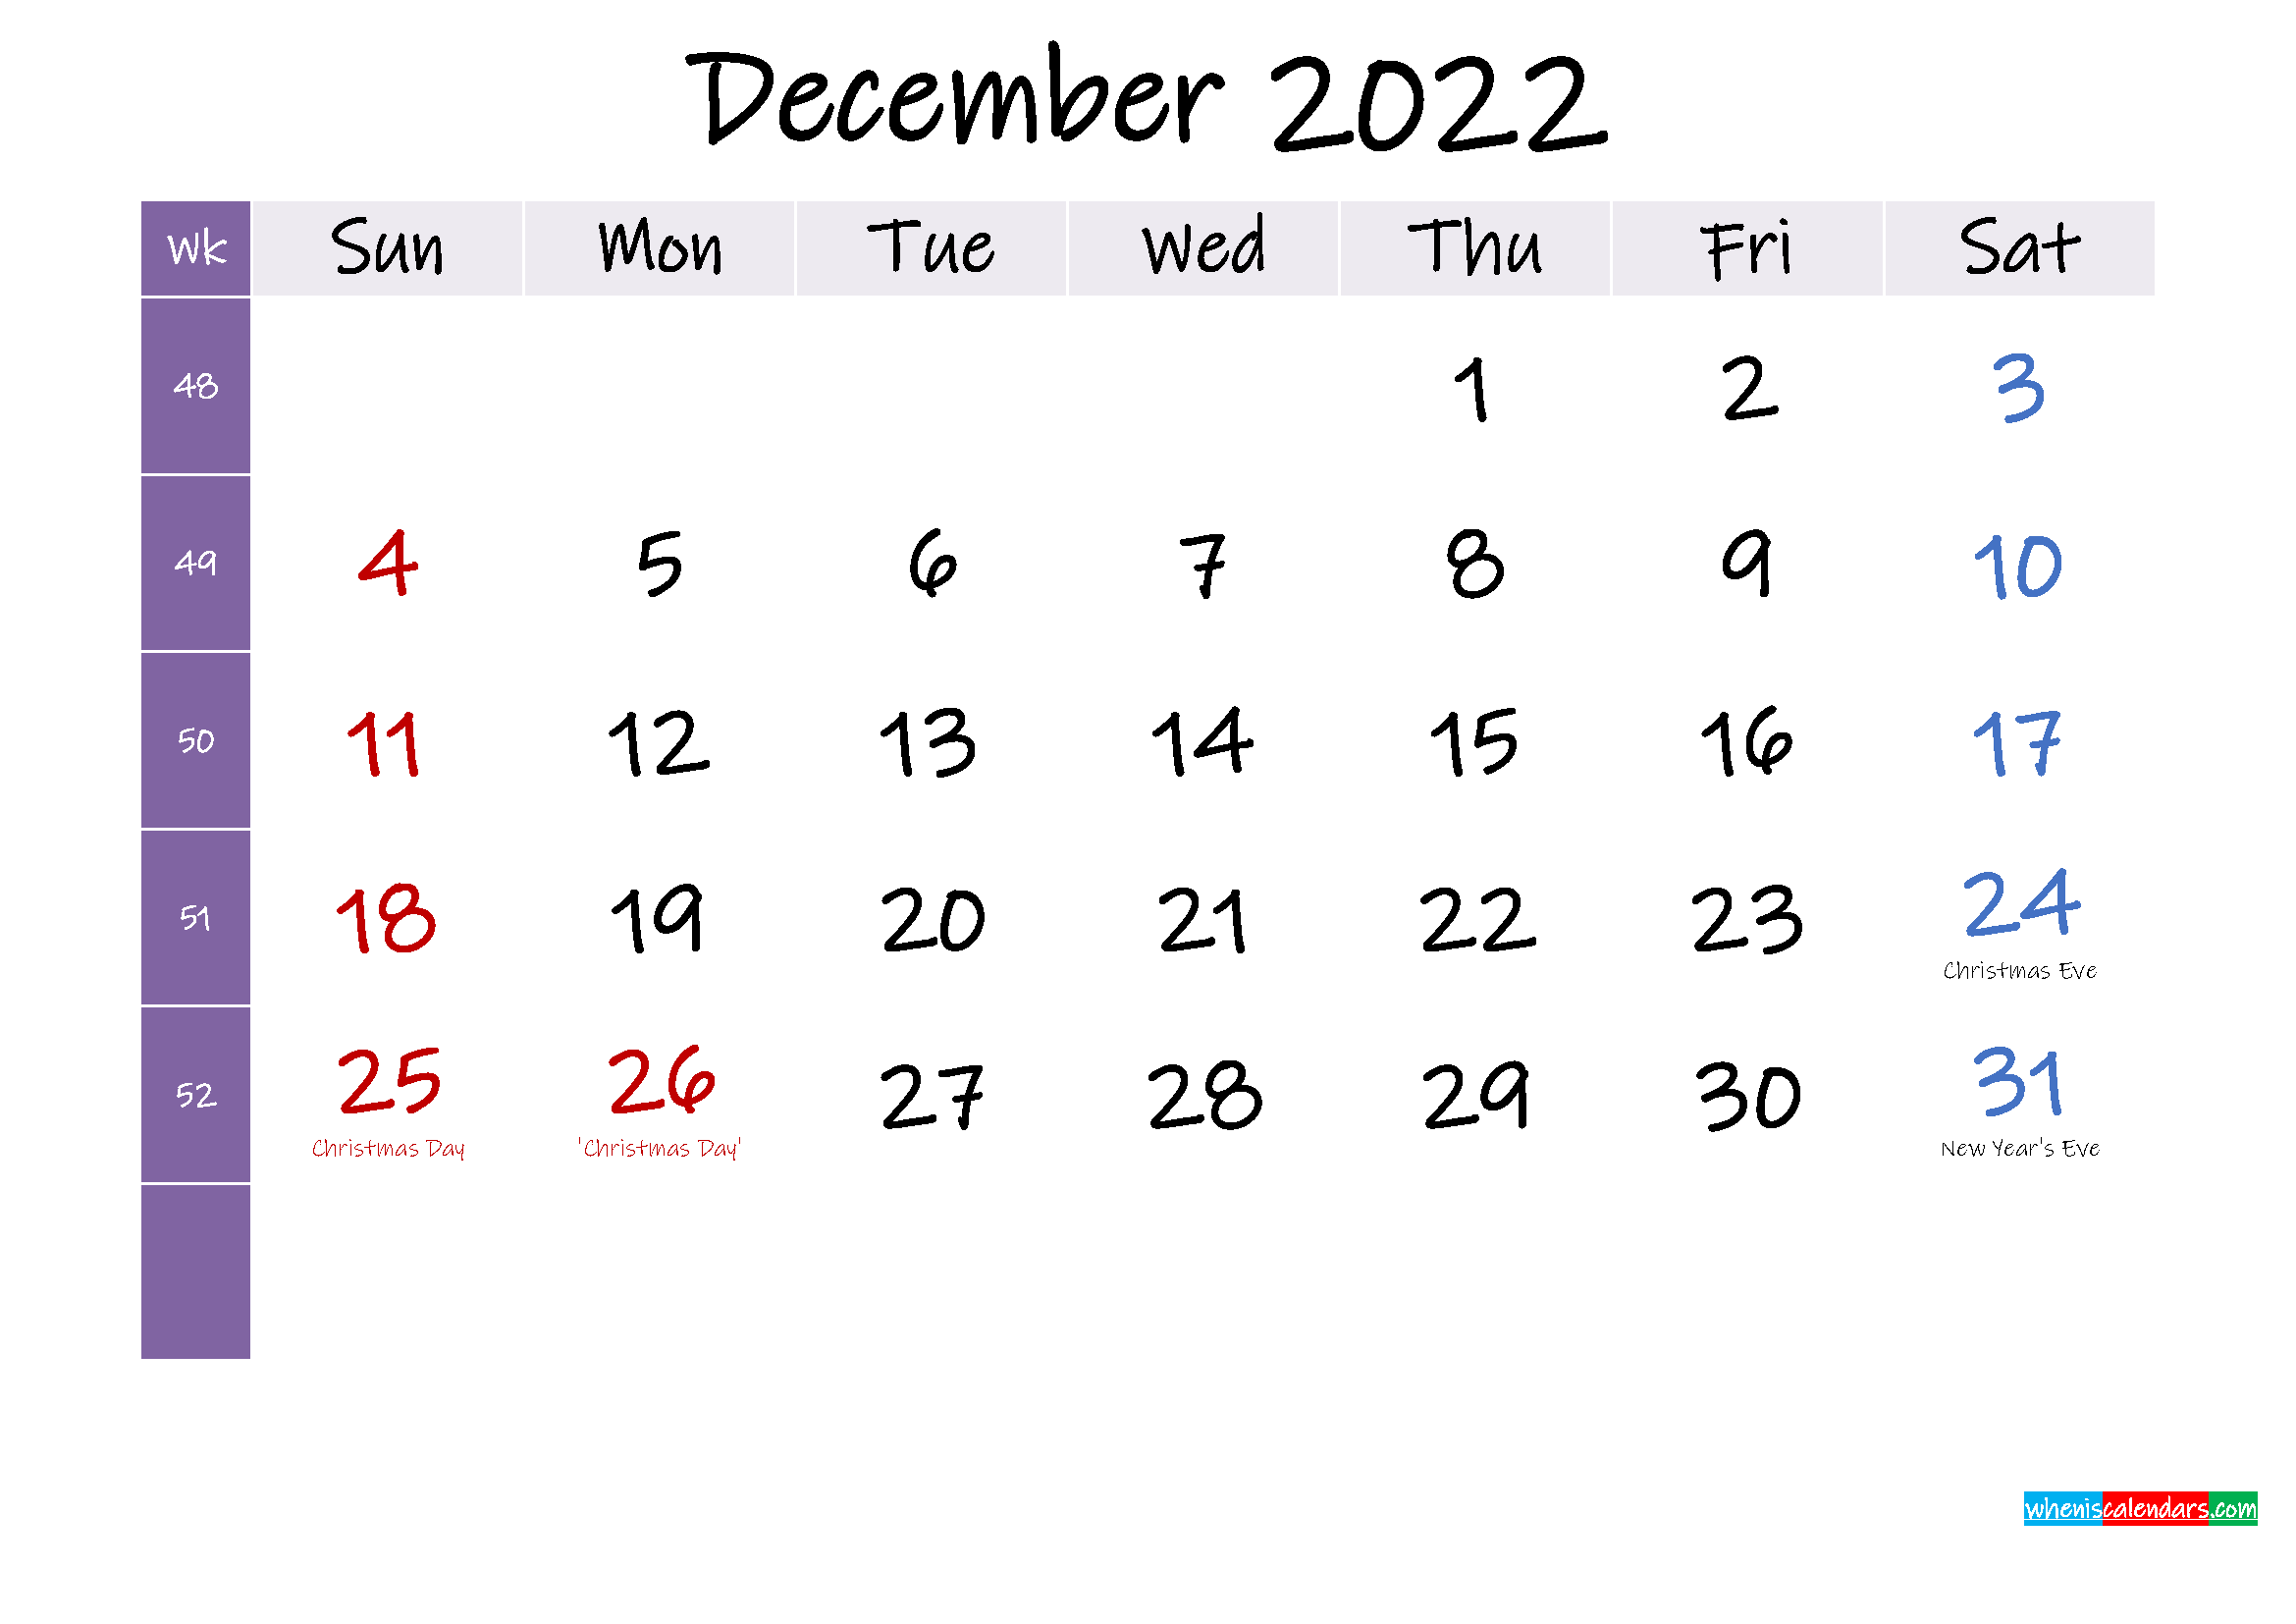 December 2022 Free Printable Calendar With Holidays Template No ink22m396